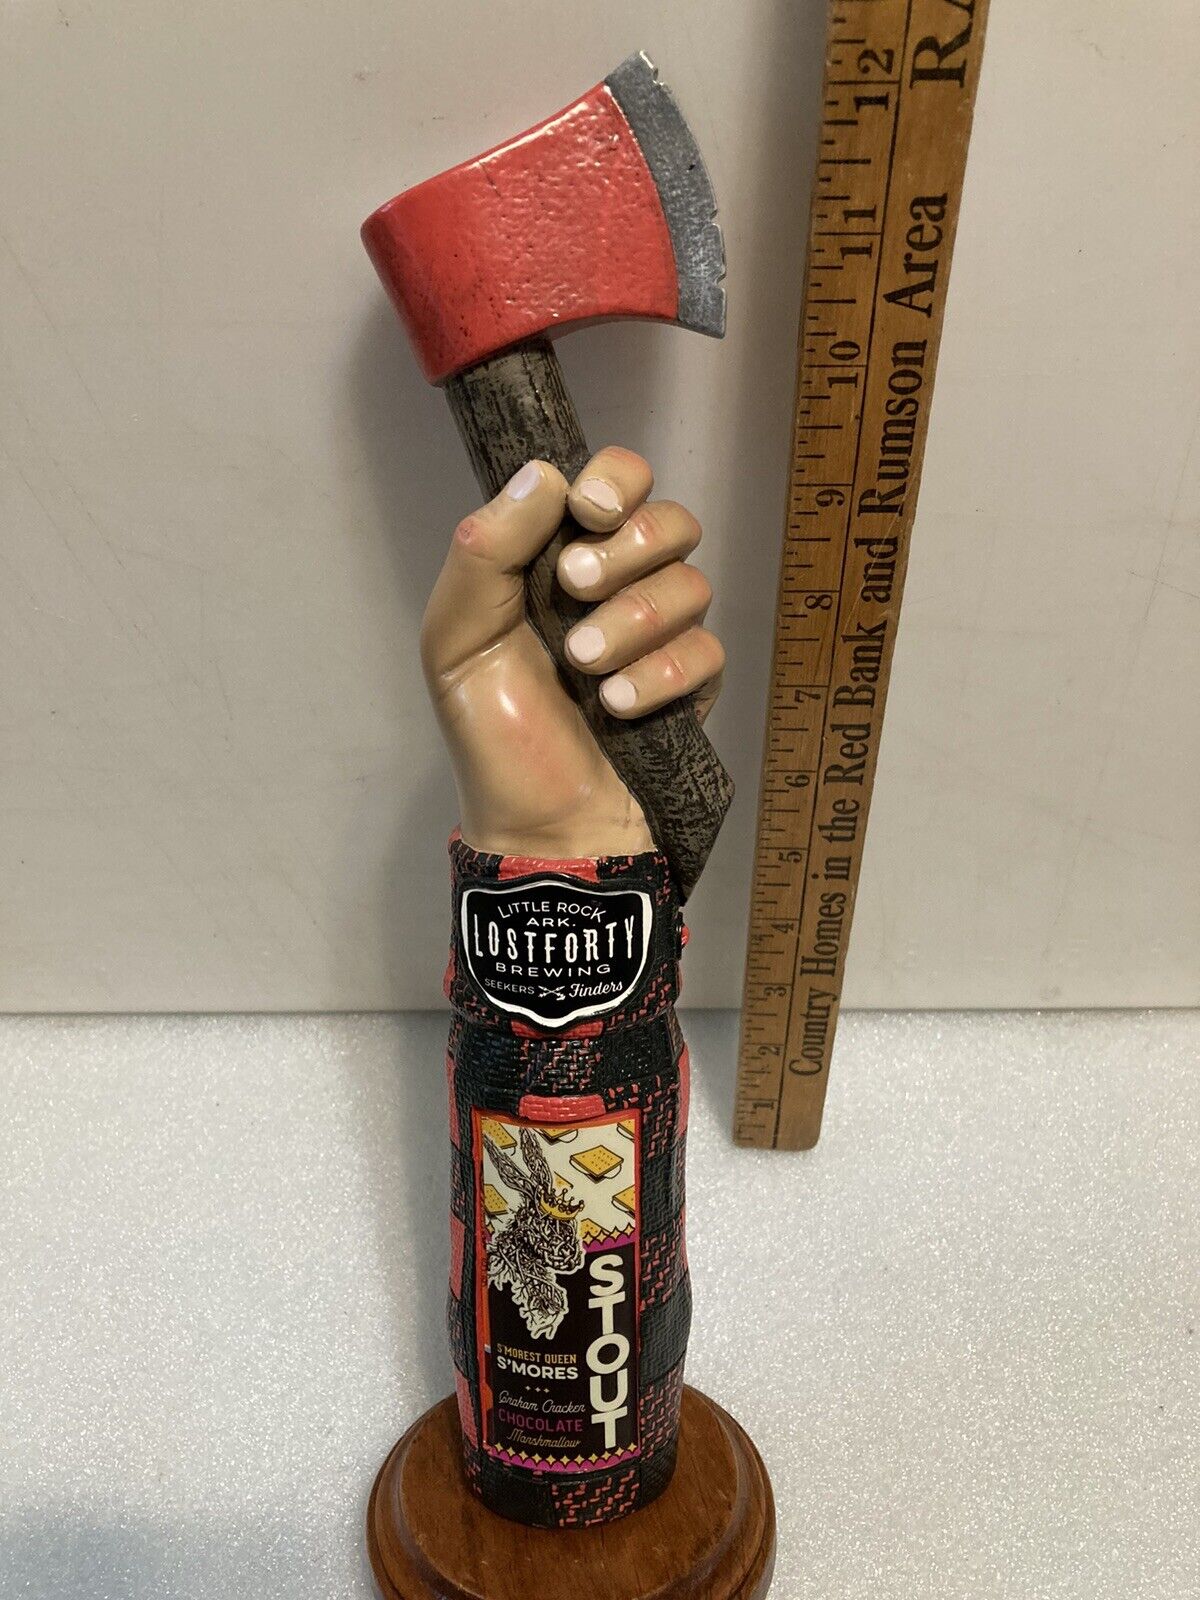 LOST FORTY LUMBERJACK AND AXE SMORES STOUT draft beer tap handle. ARKANSAS